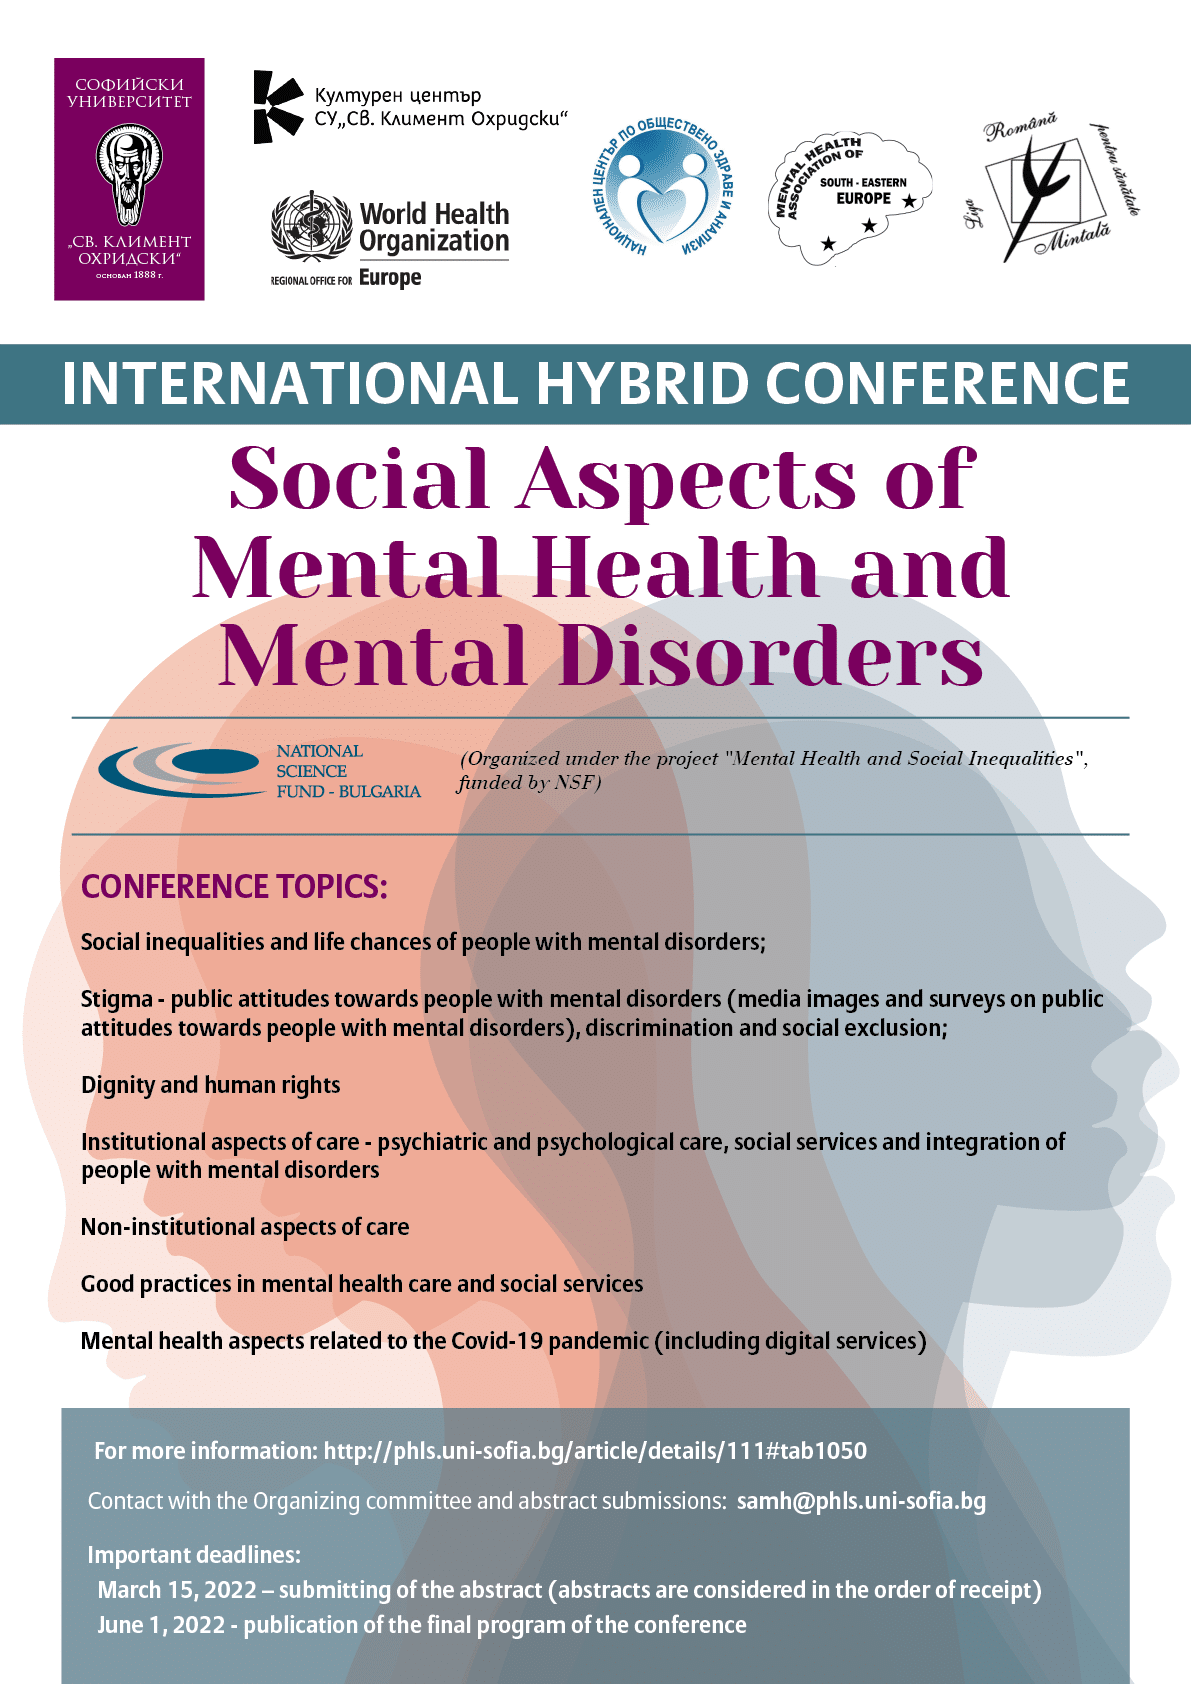 Social Aspects of Mental Health and Mental Disorders